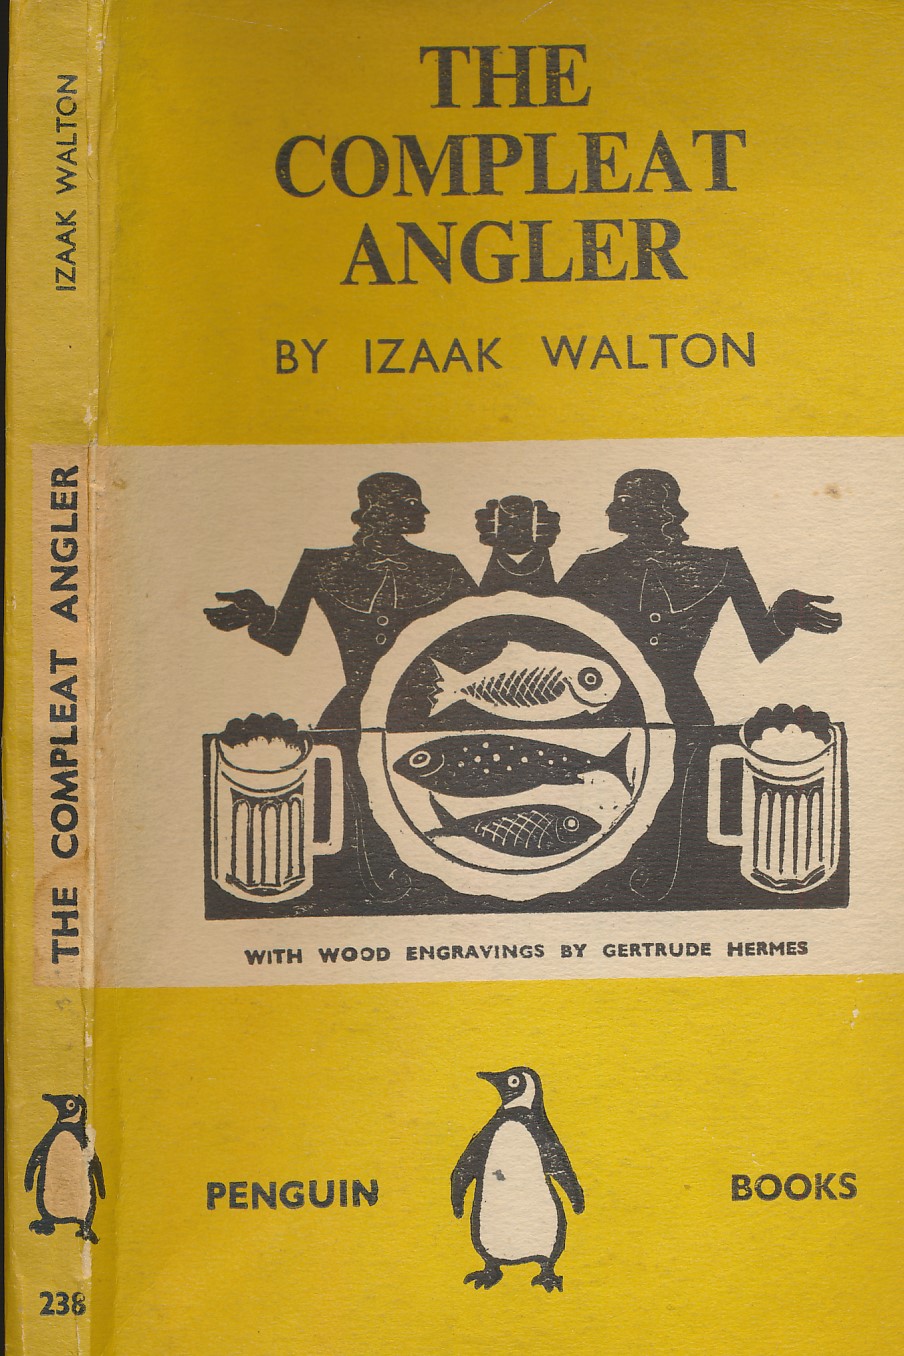 The Compleat Angler. Penguin No. 236.